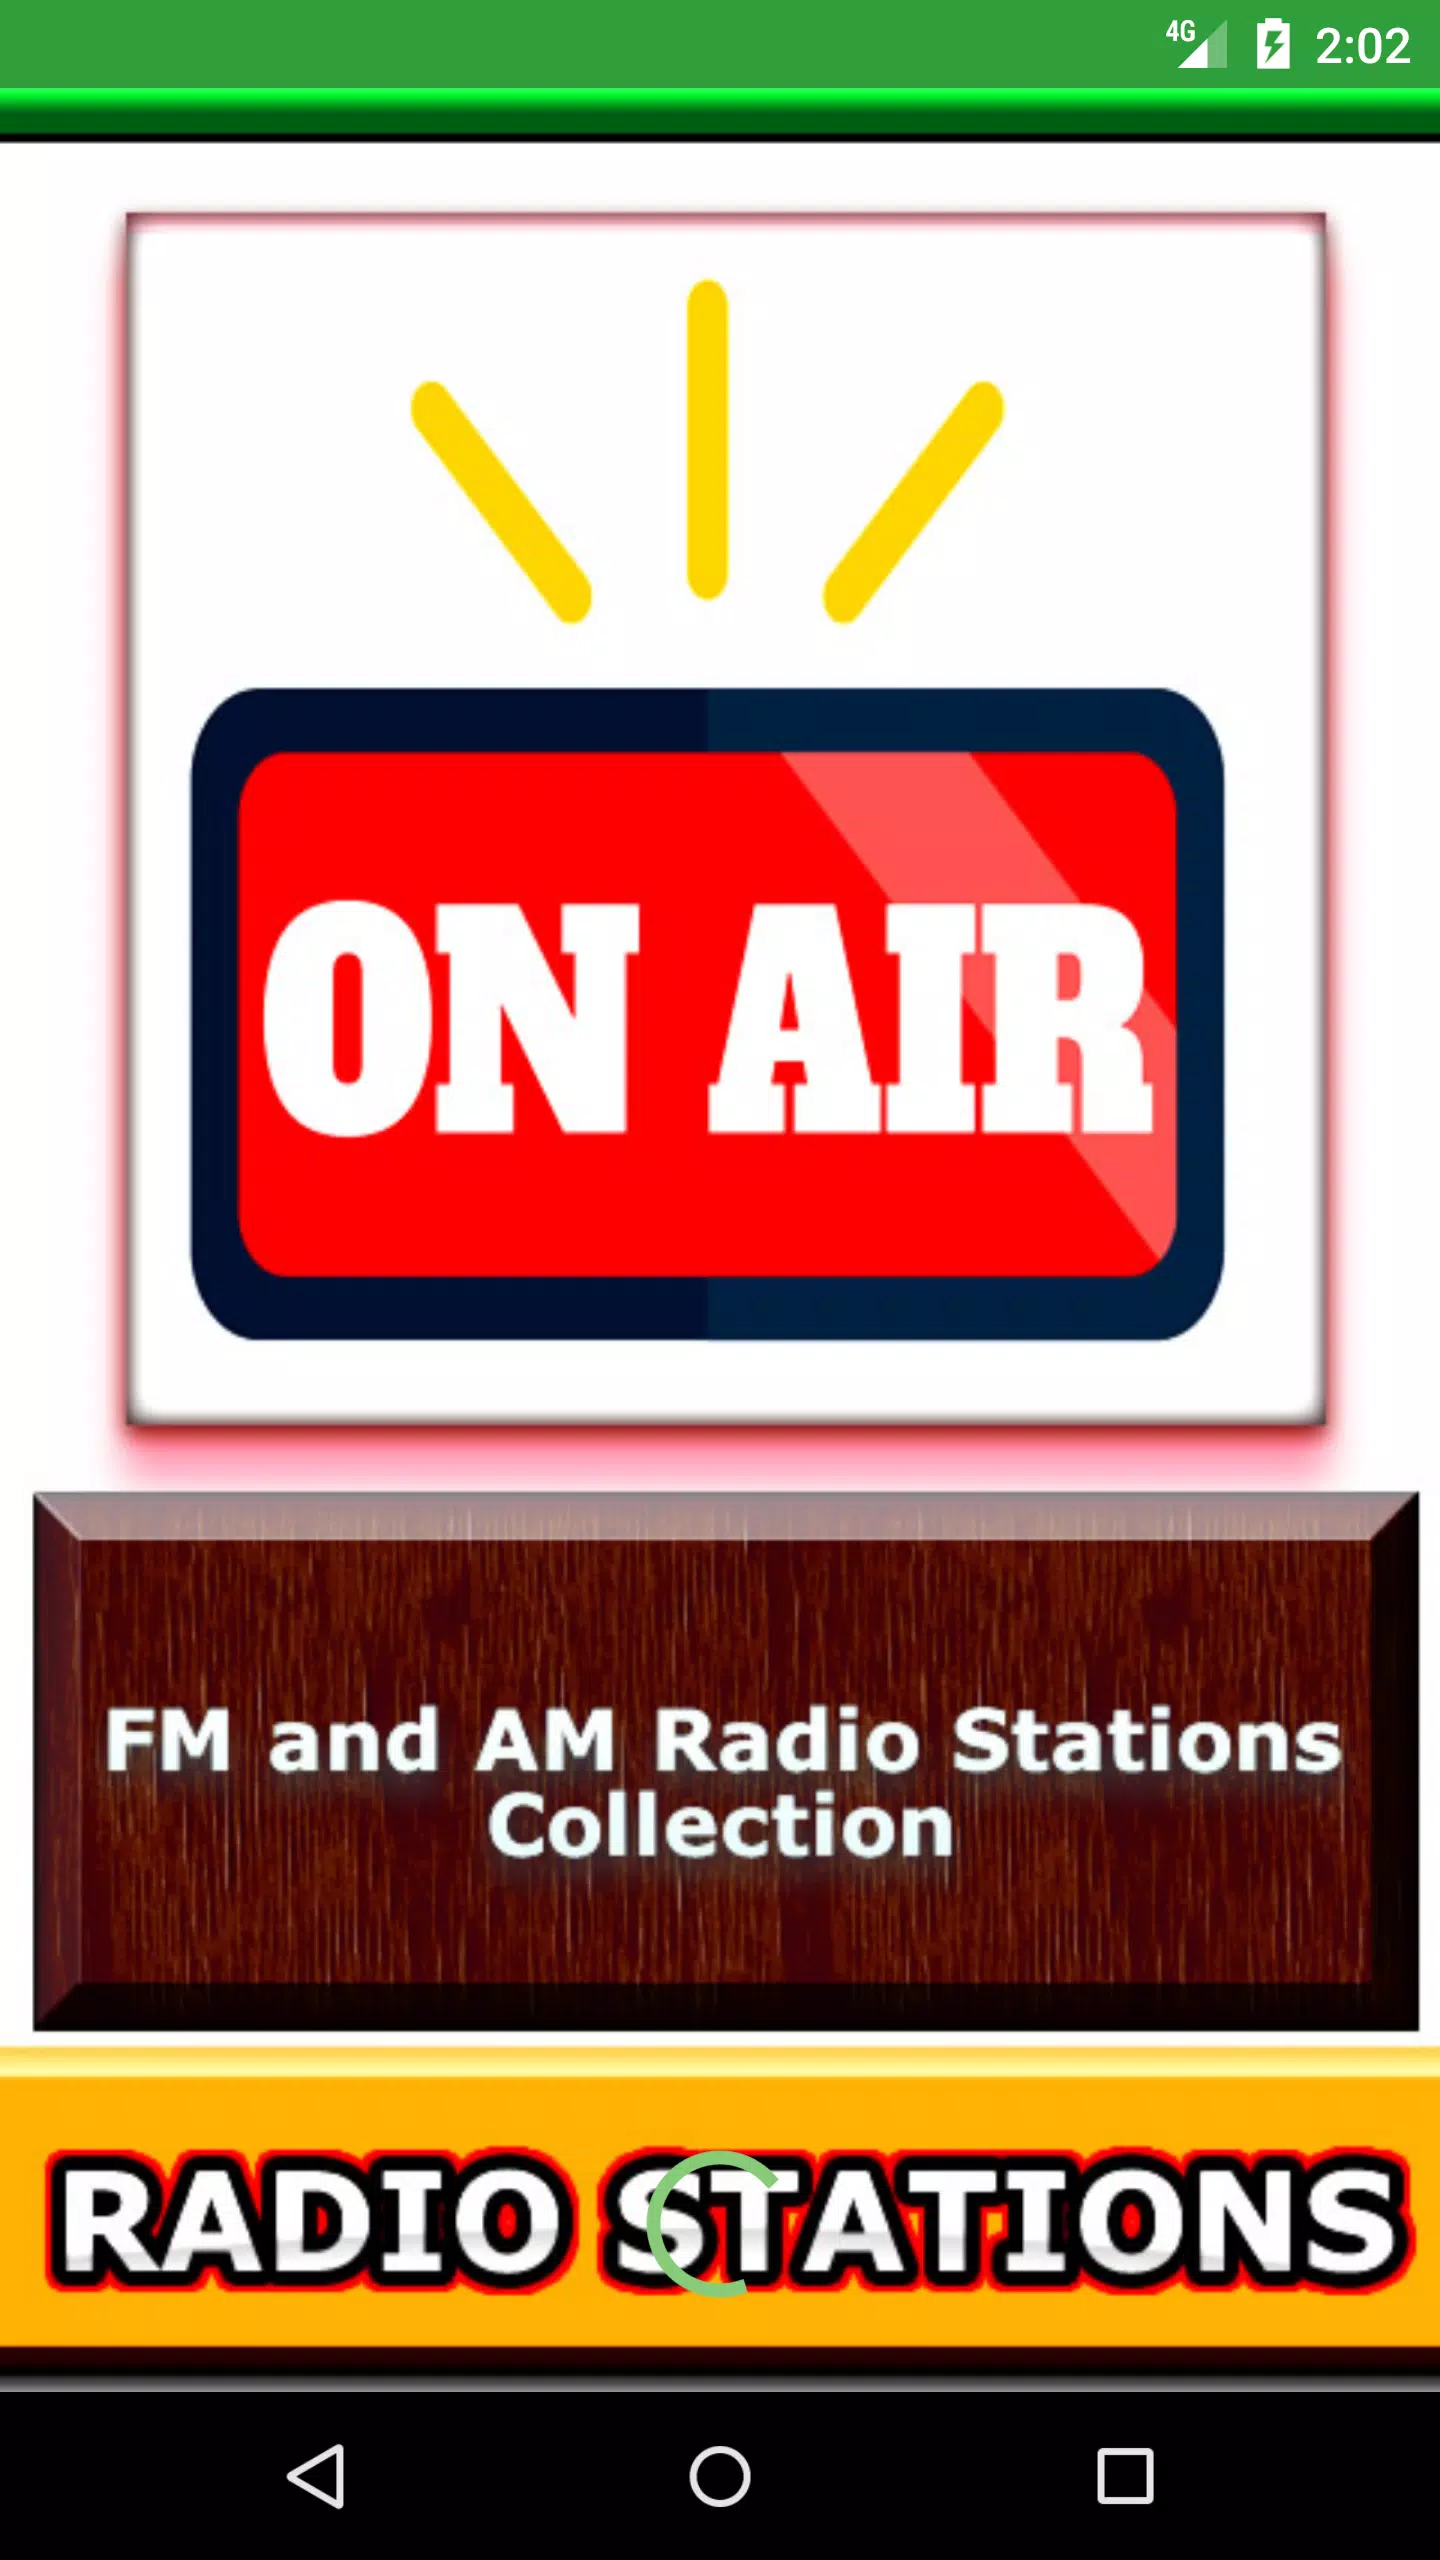 Jacksonville Radio Stations for Android - APK Download